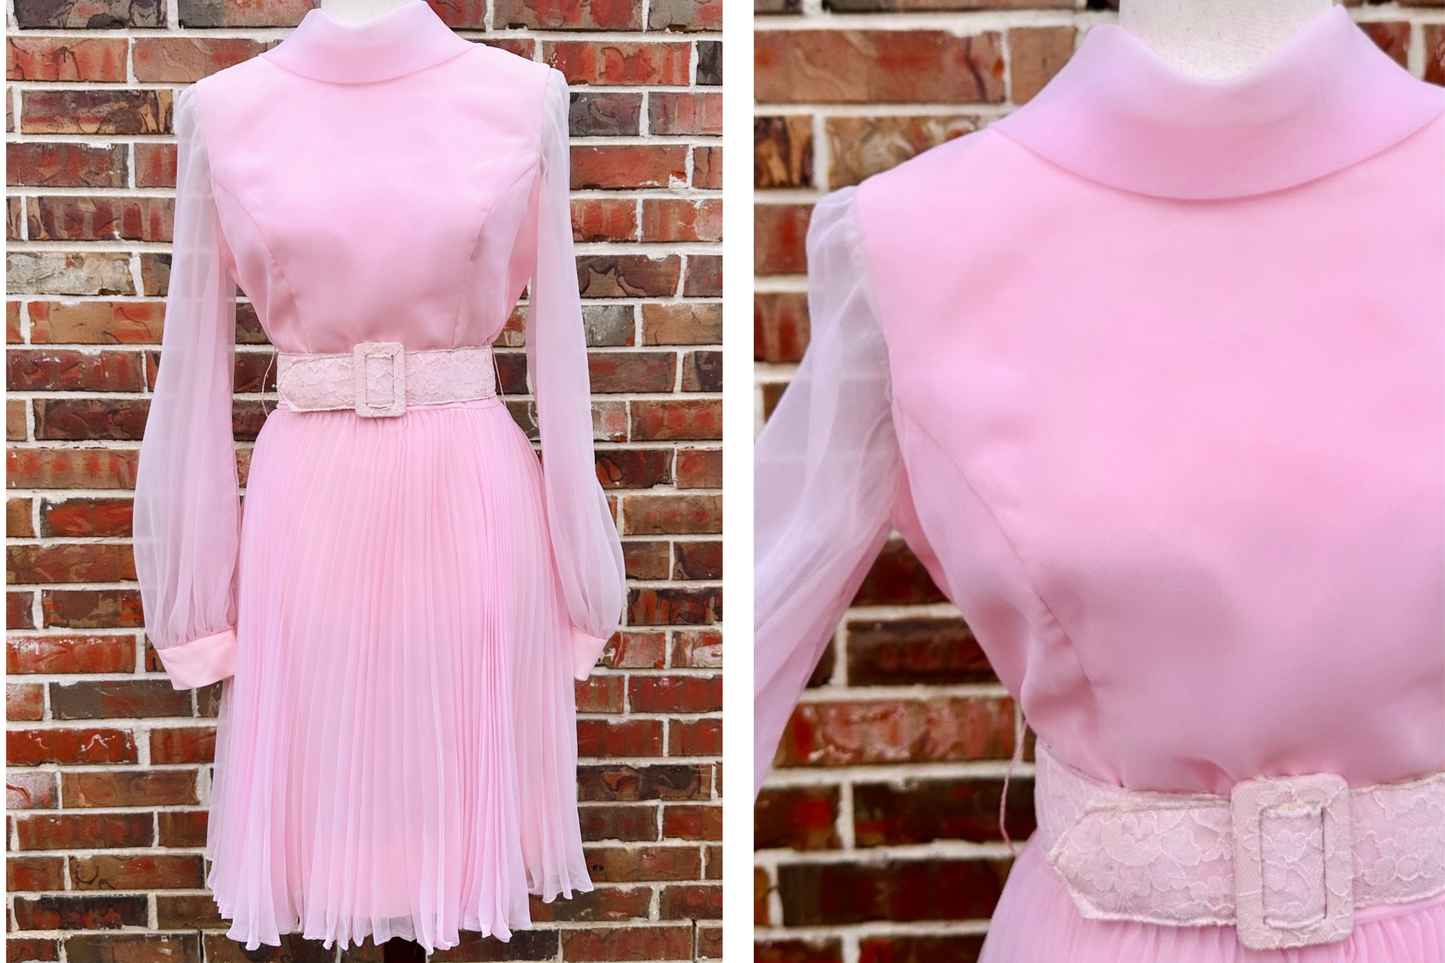 Cotton Candy Pink Vintage 60s Party Dress,  Gorgeous True VTG Chiffon Dress w Poets Sleeve & Lace Belt, Accordion Pleated Skirt Size Small